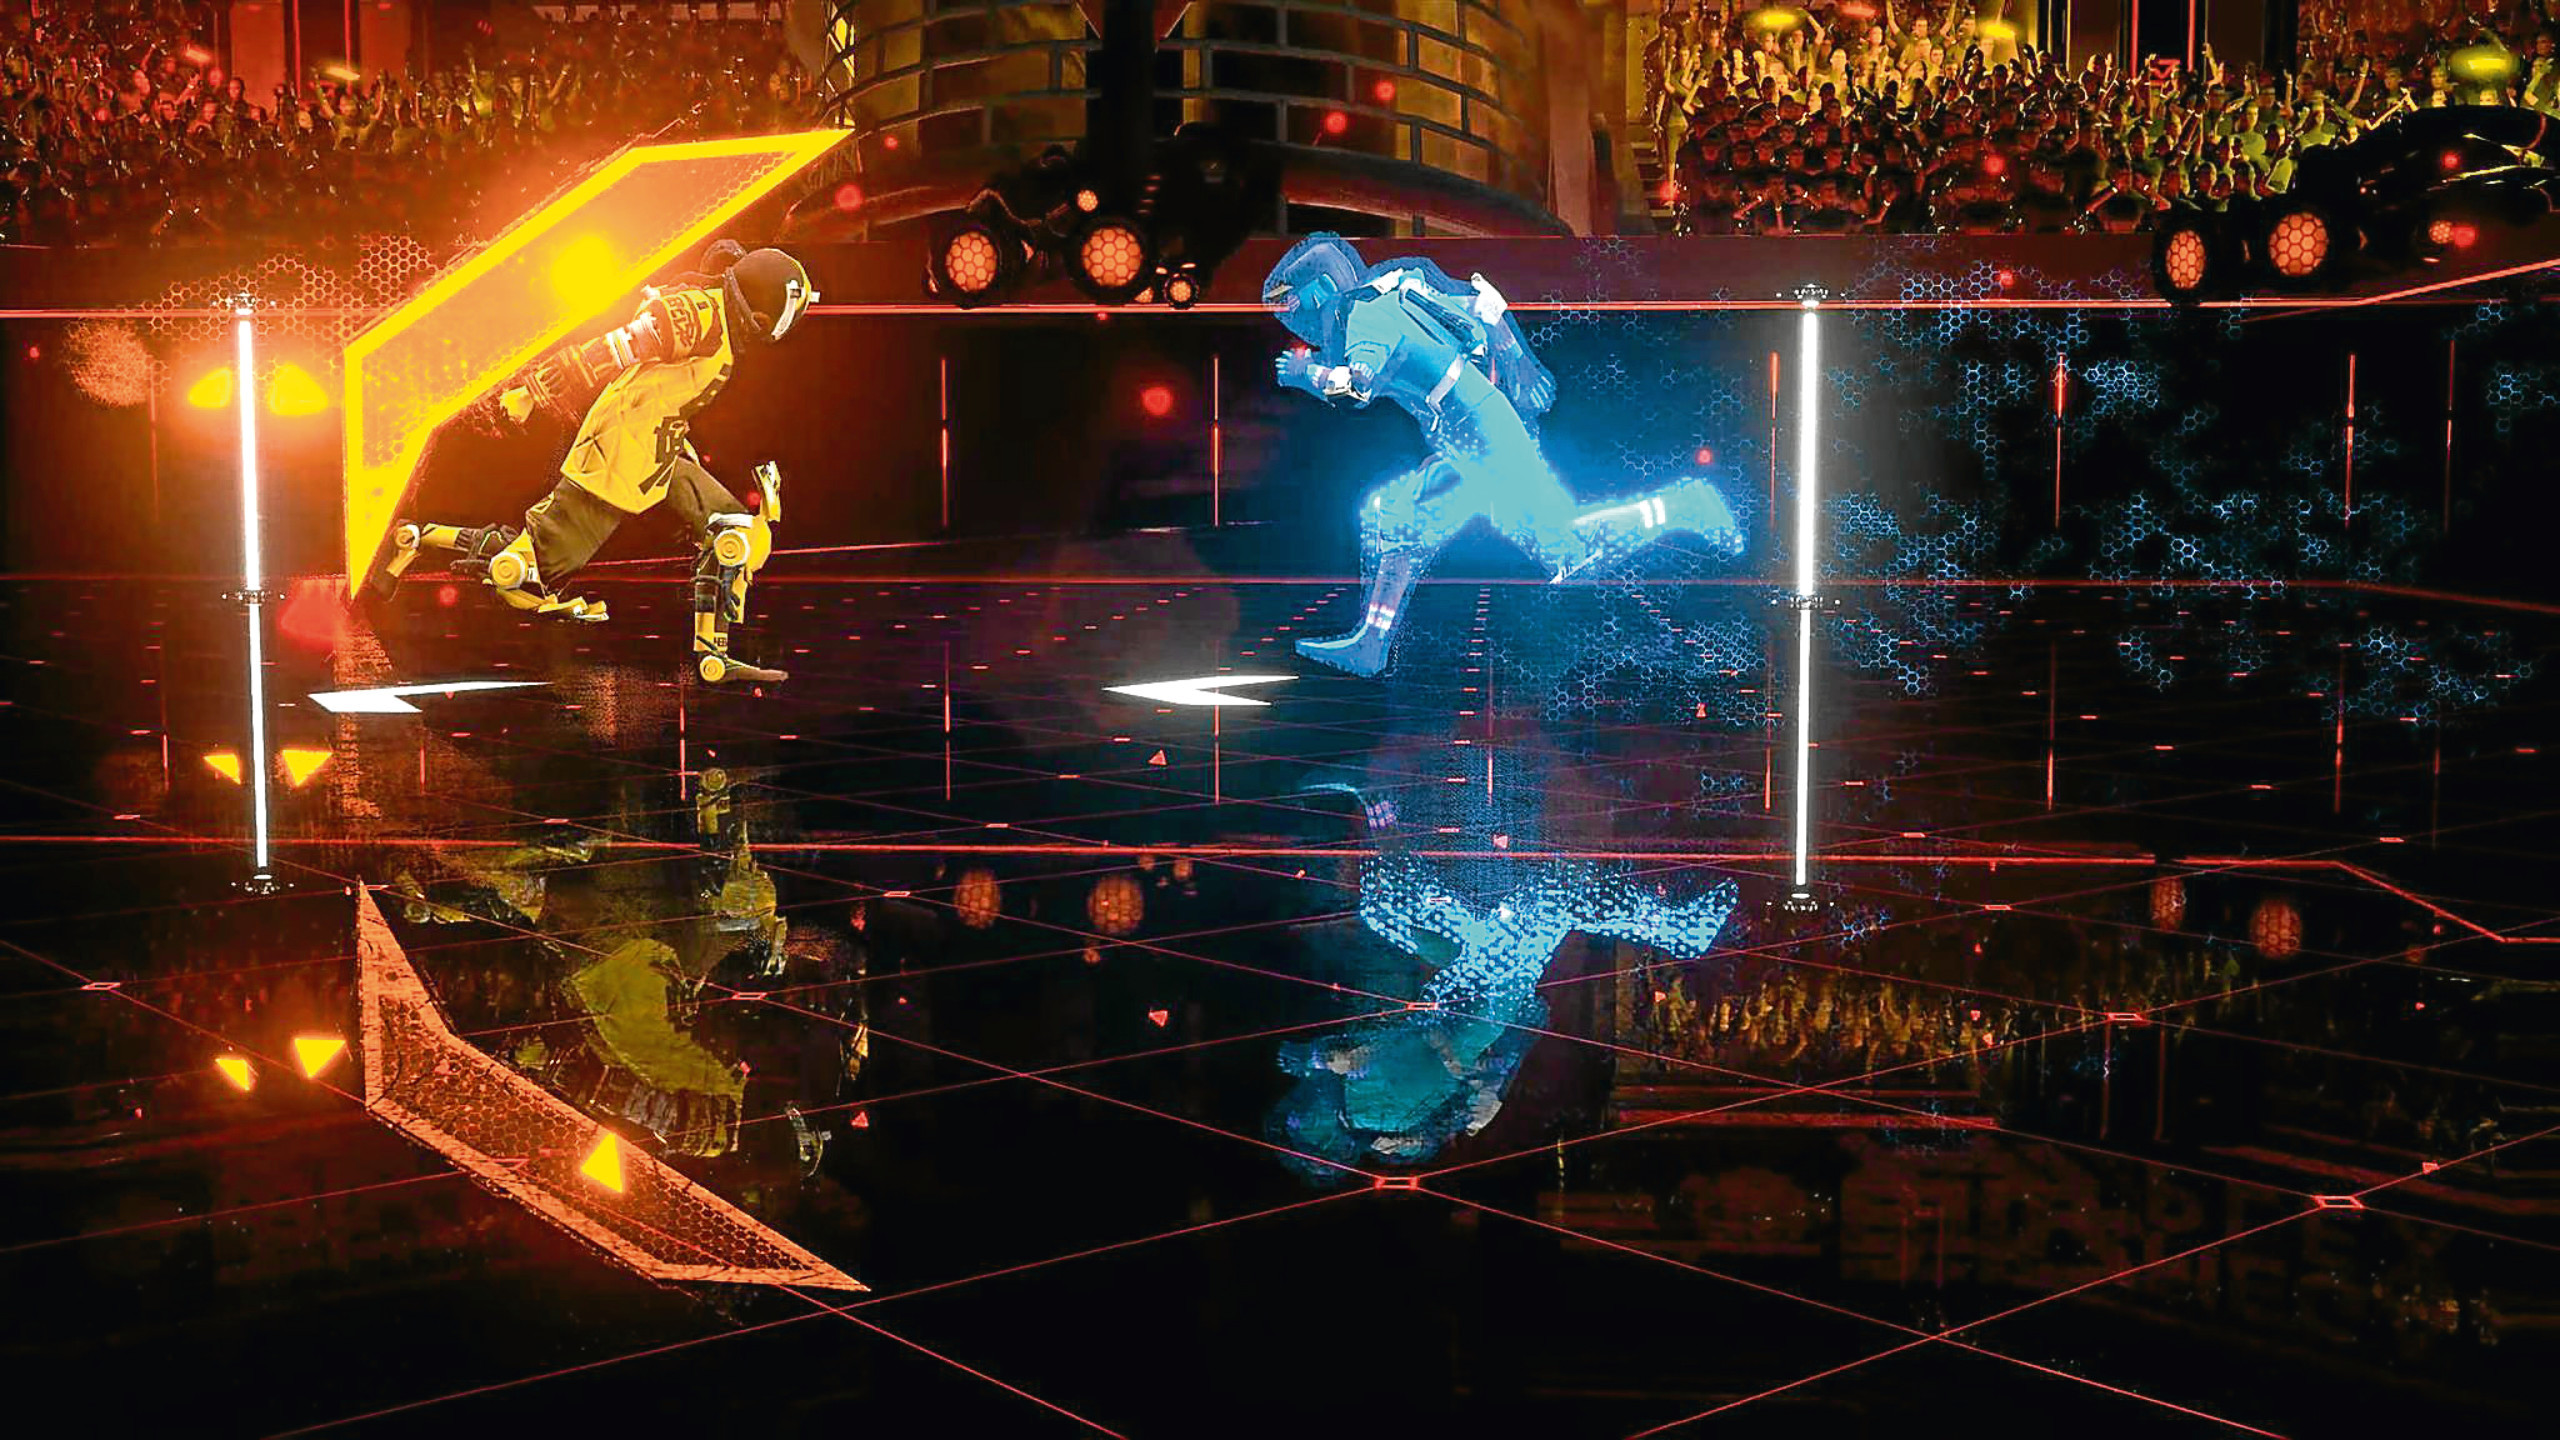 Laser League, produced by Roll7, who were supported by the UK Games Fund.